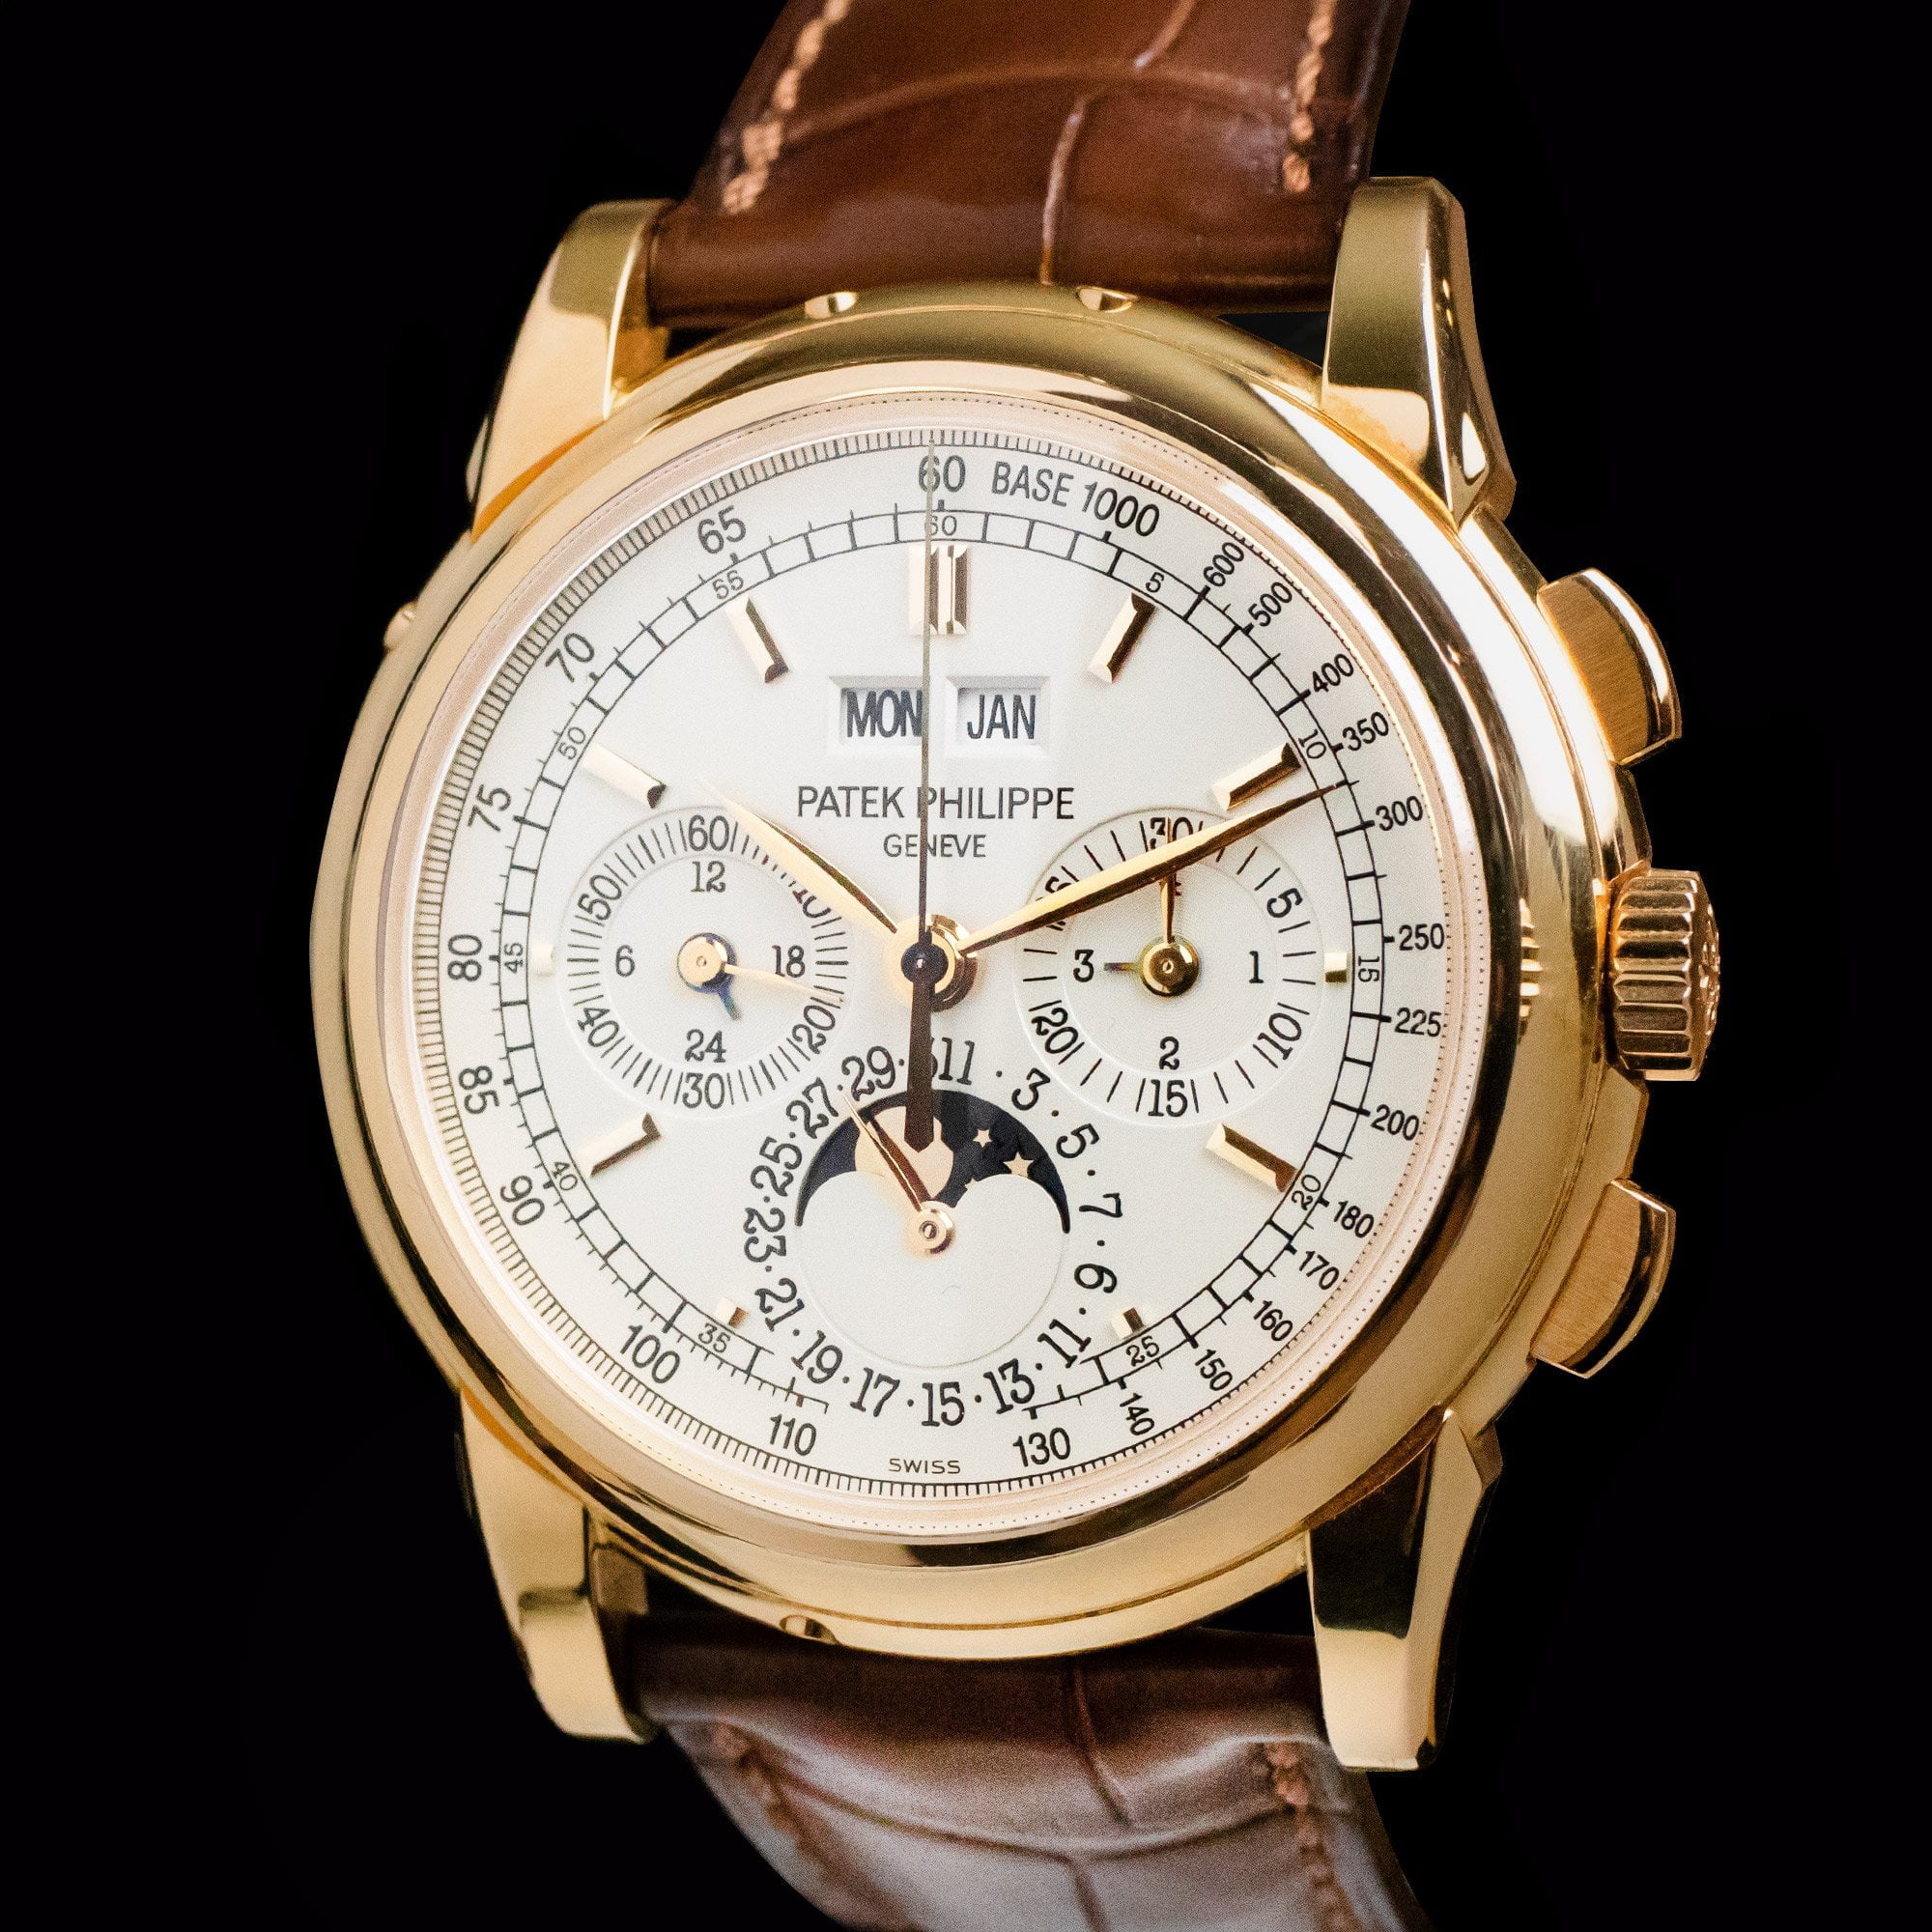 Patek Philippe Grand Complications 5970R - AMSTERDAM VINTAGE WATCHES